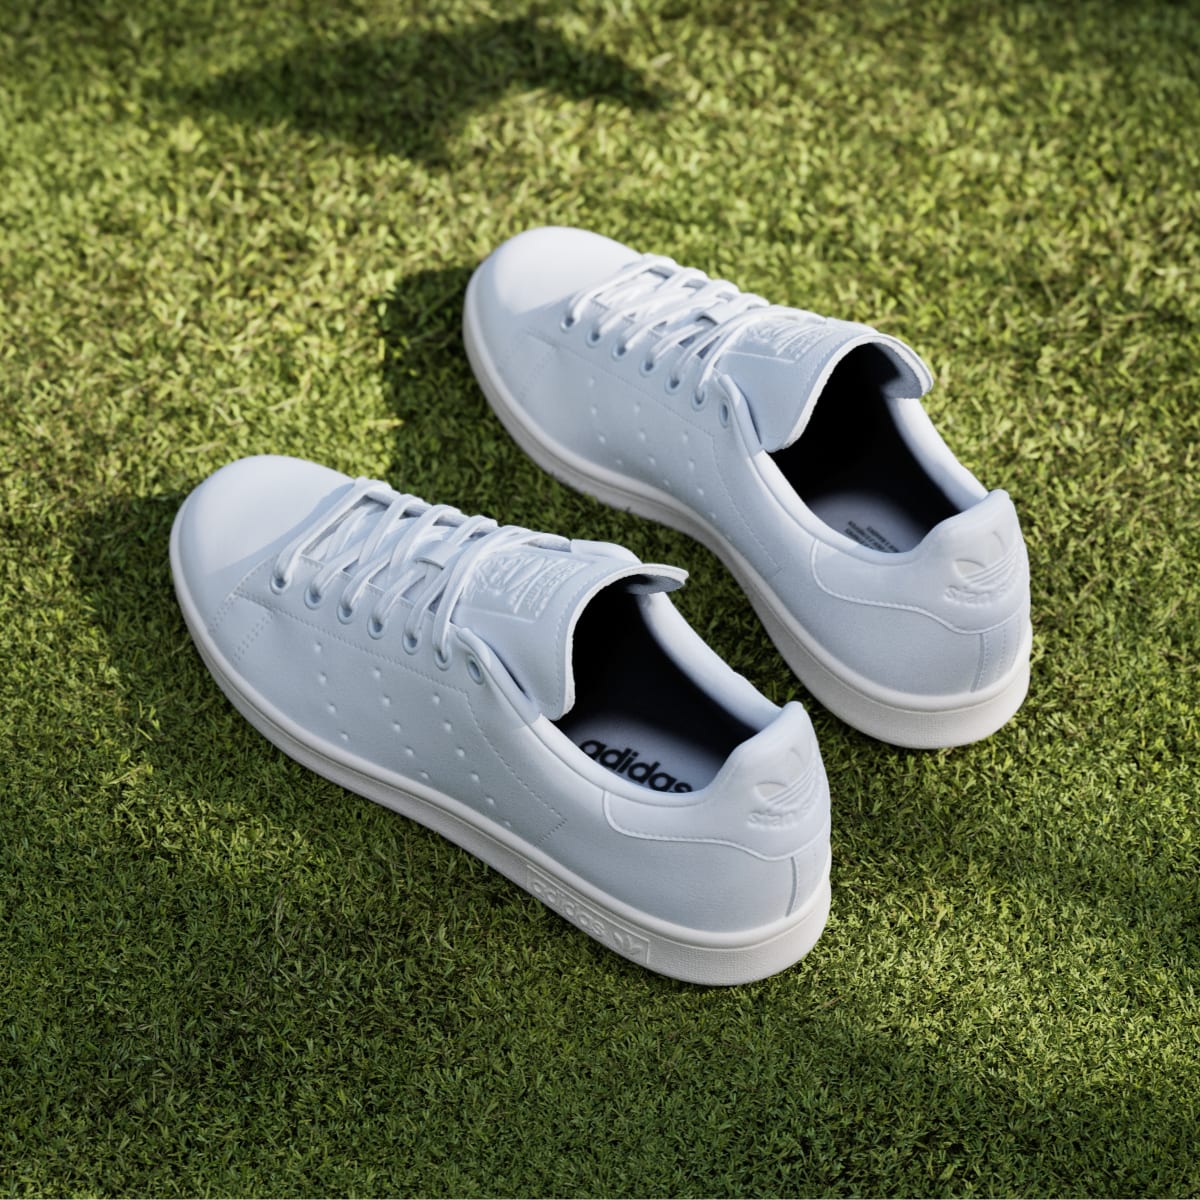 Adidas Stan Smith Golf Shoes. 7